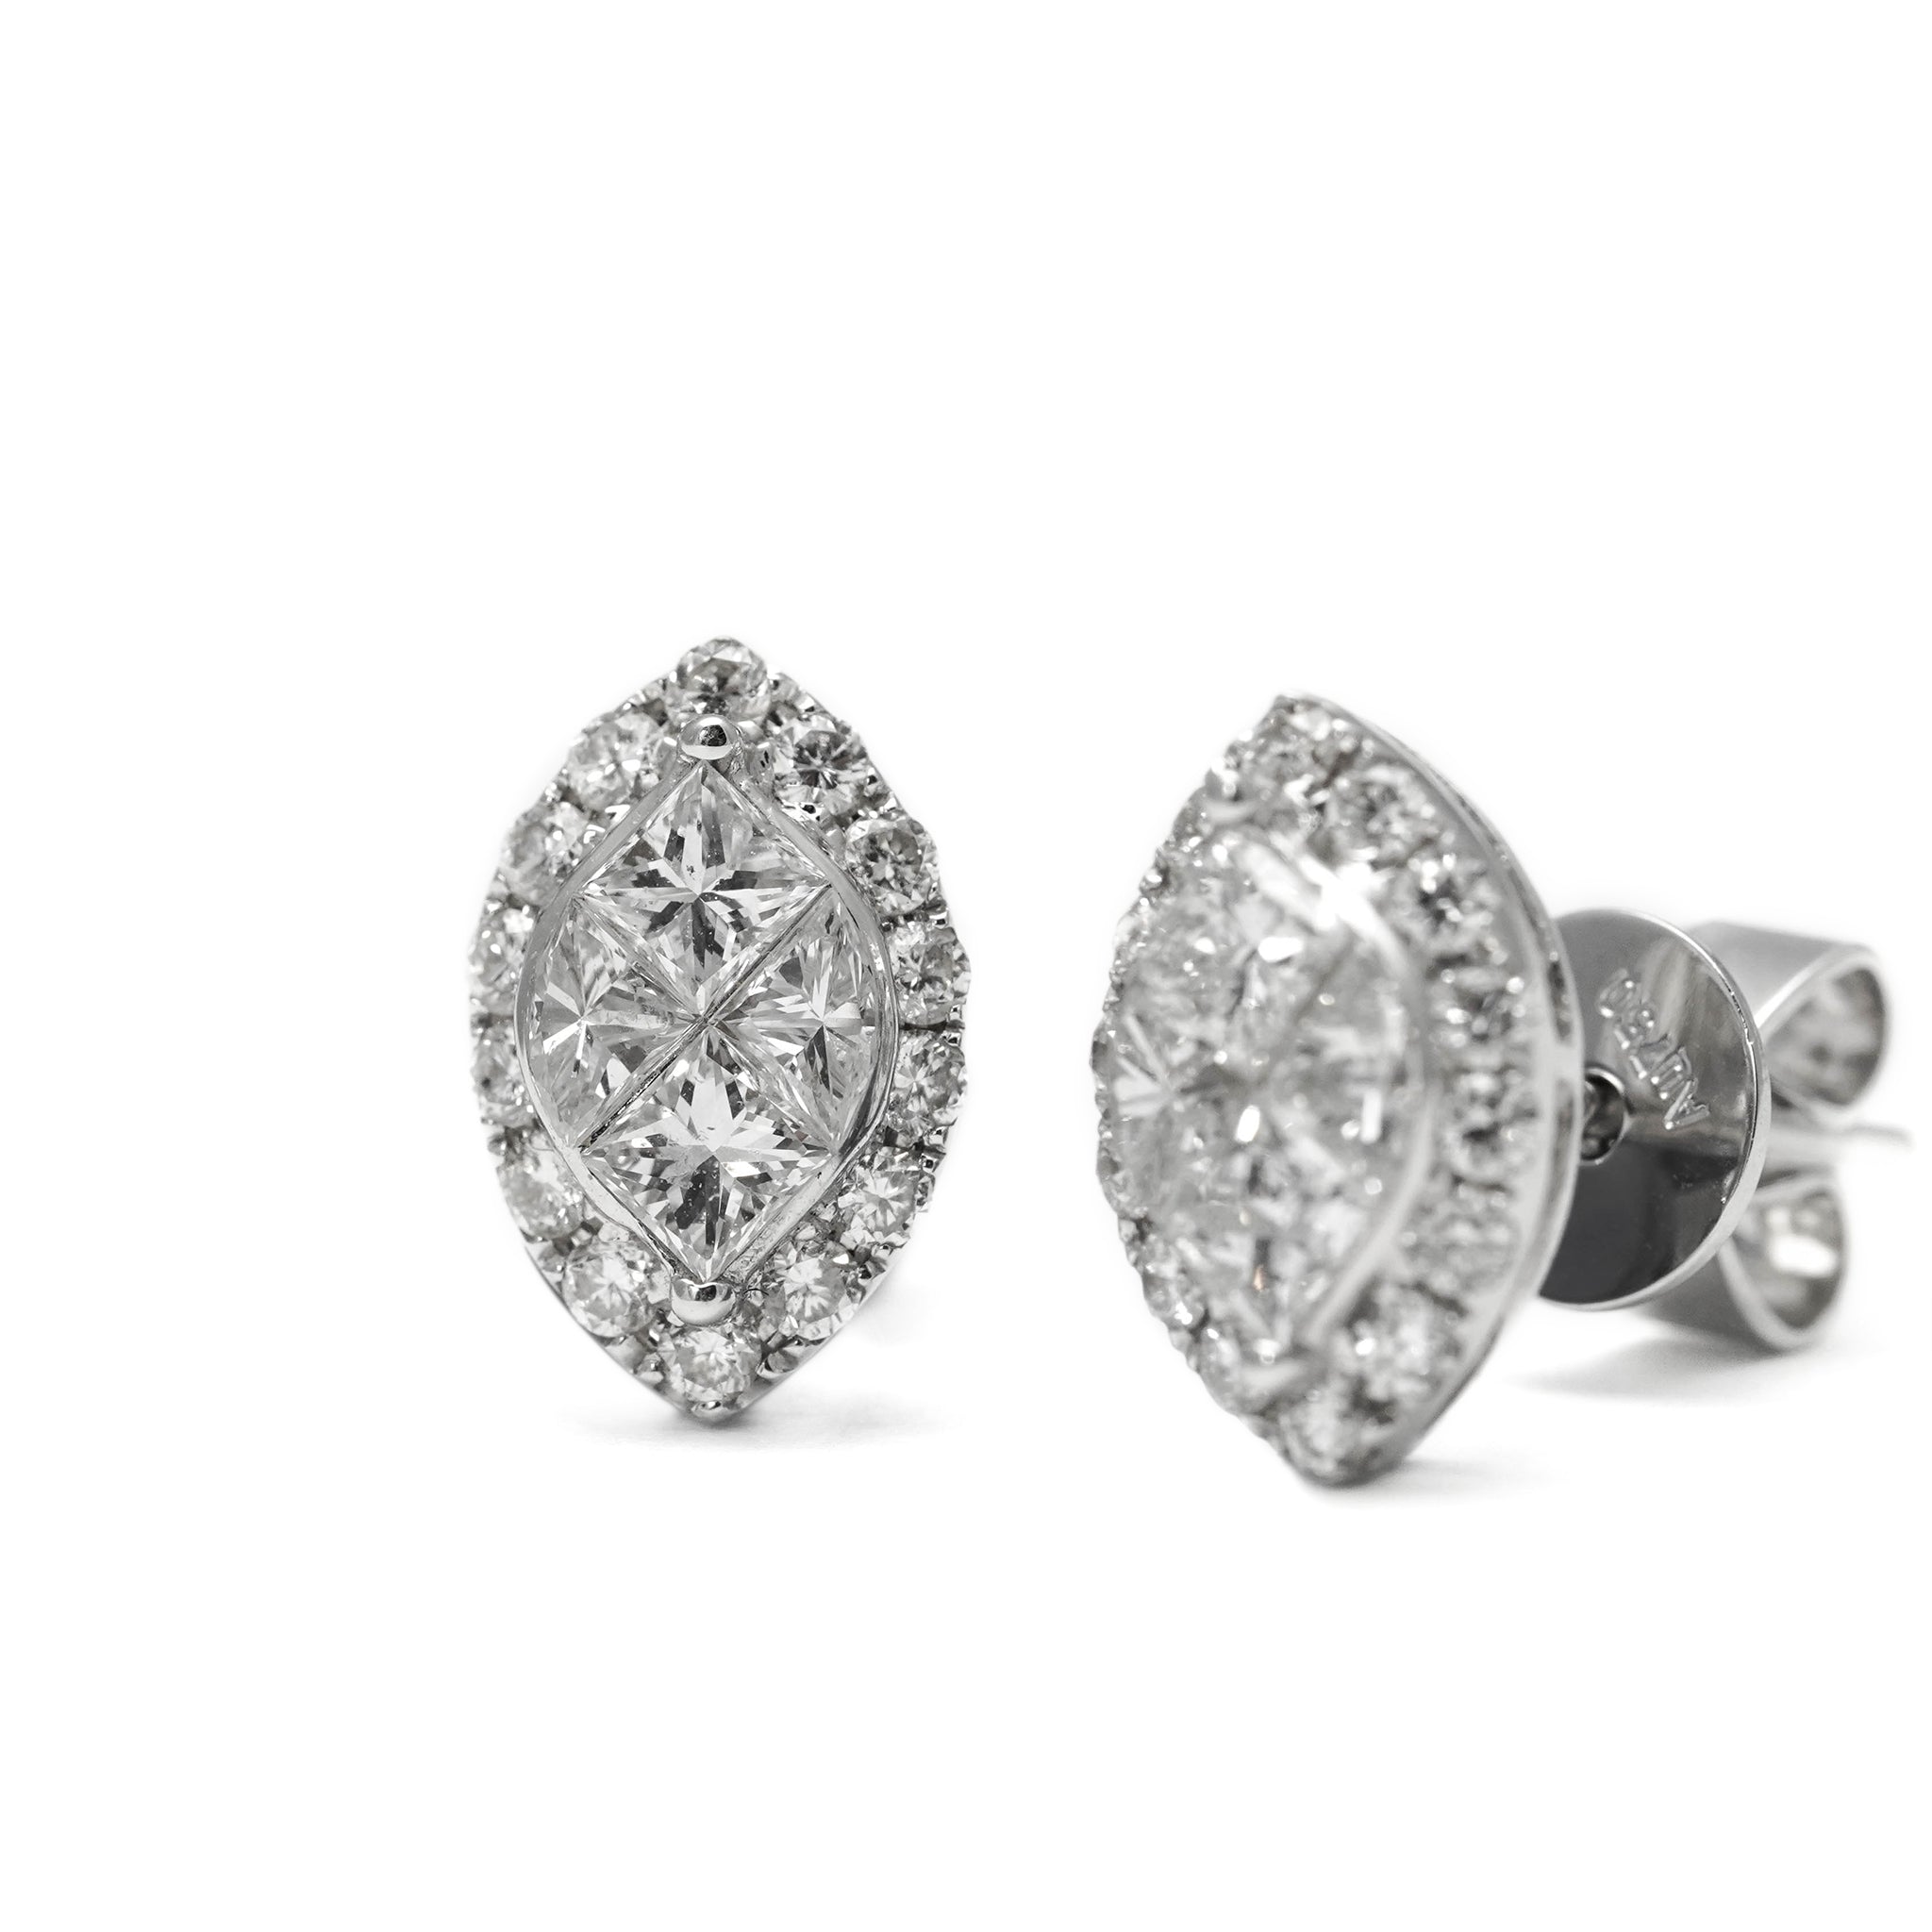 18K White Gold Marquise Shaped Diamond Studs with Halo